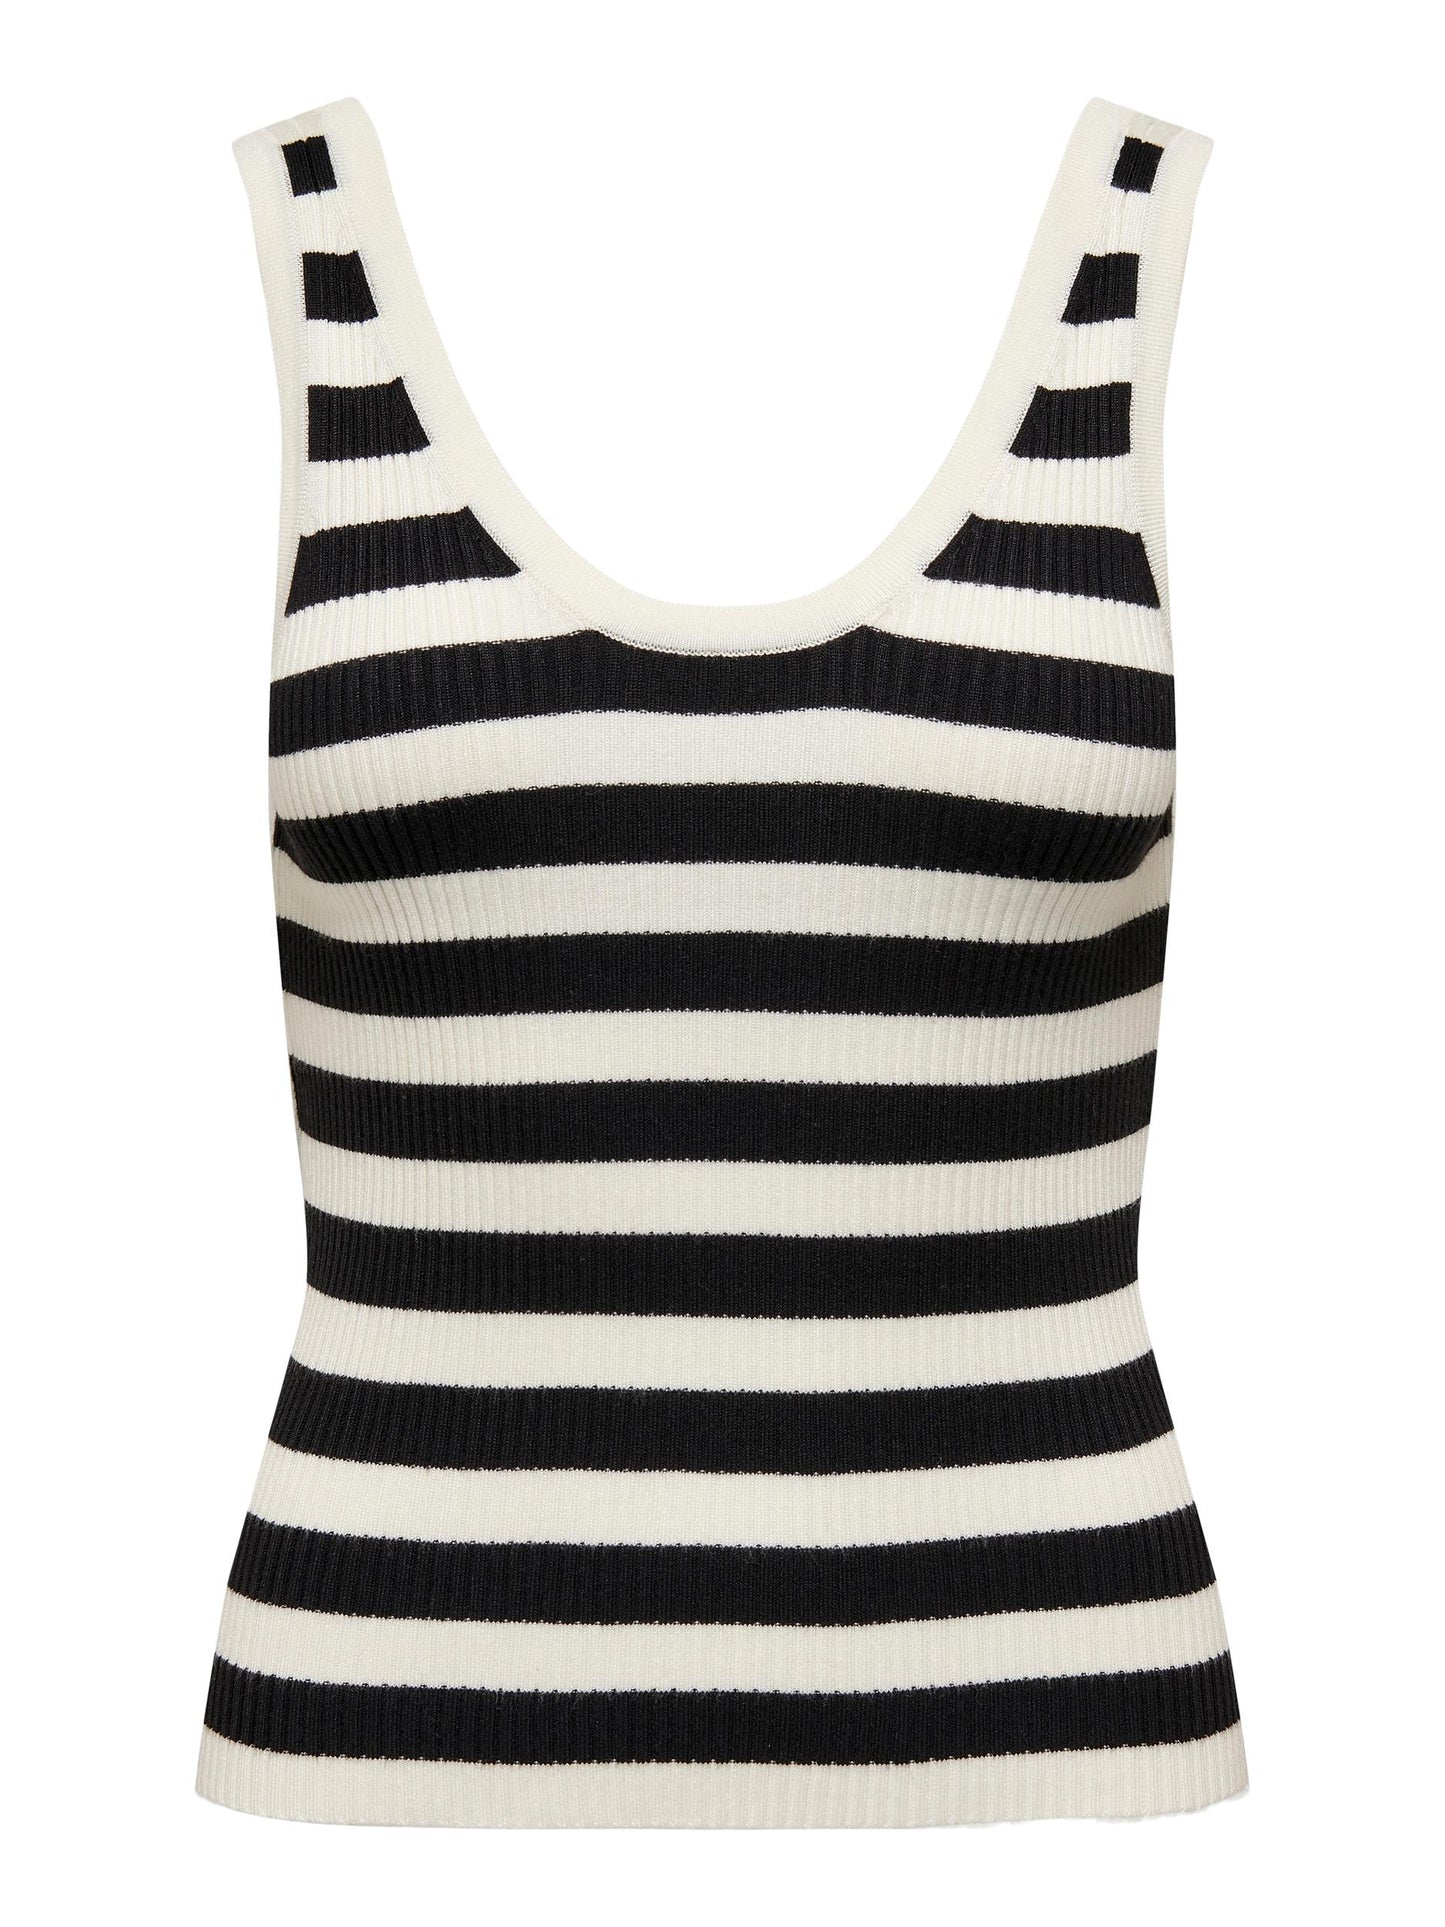 Andrea Knitted Singlet - Black Wide Stripes